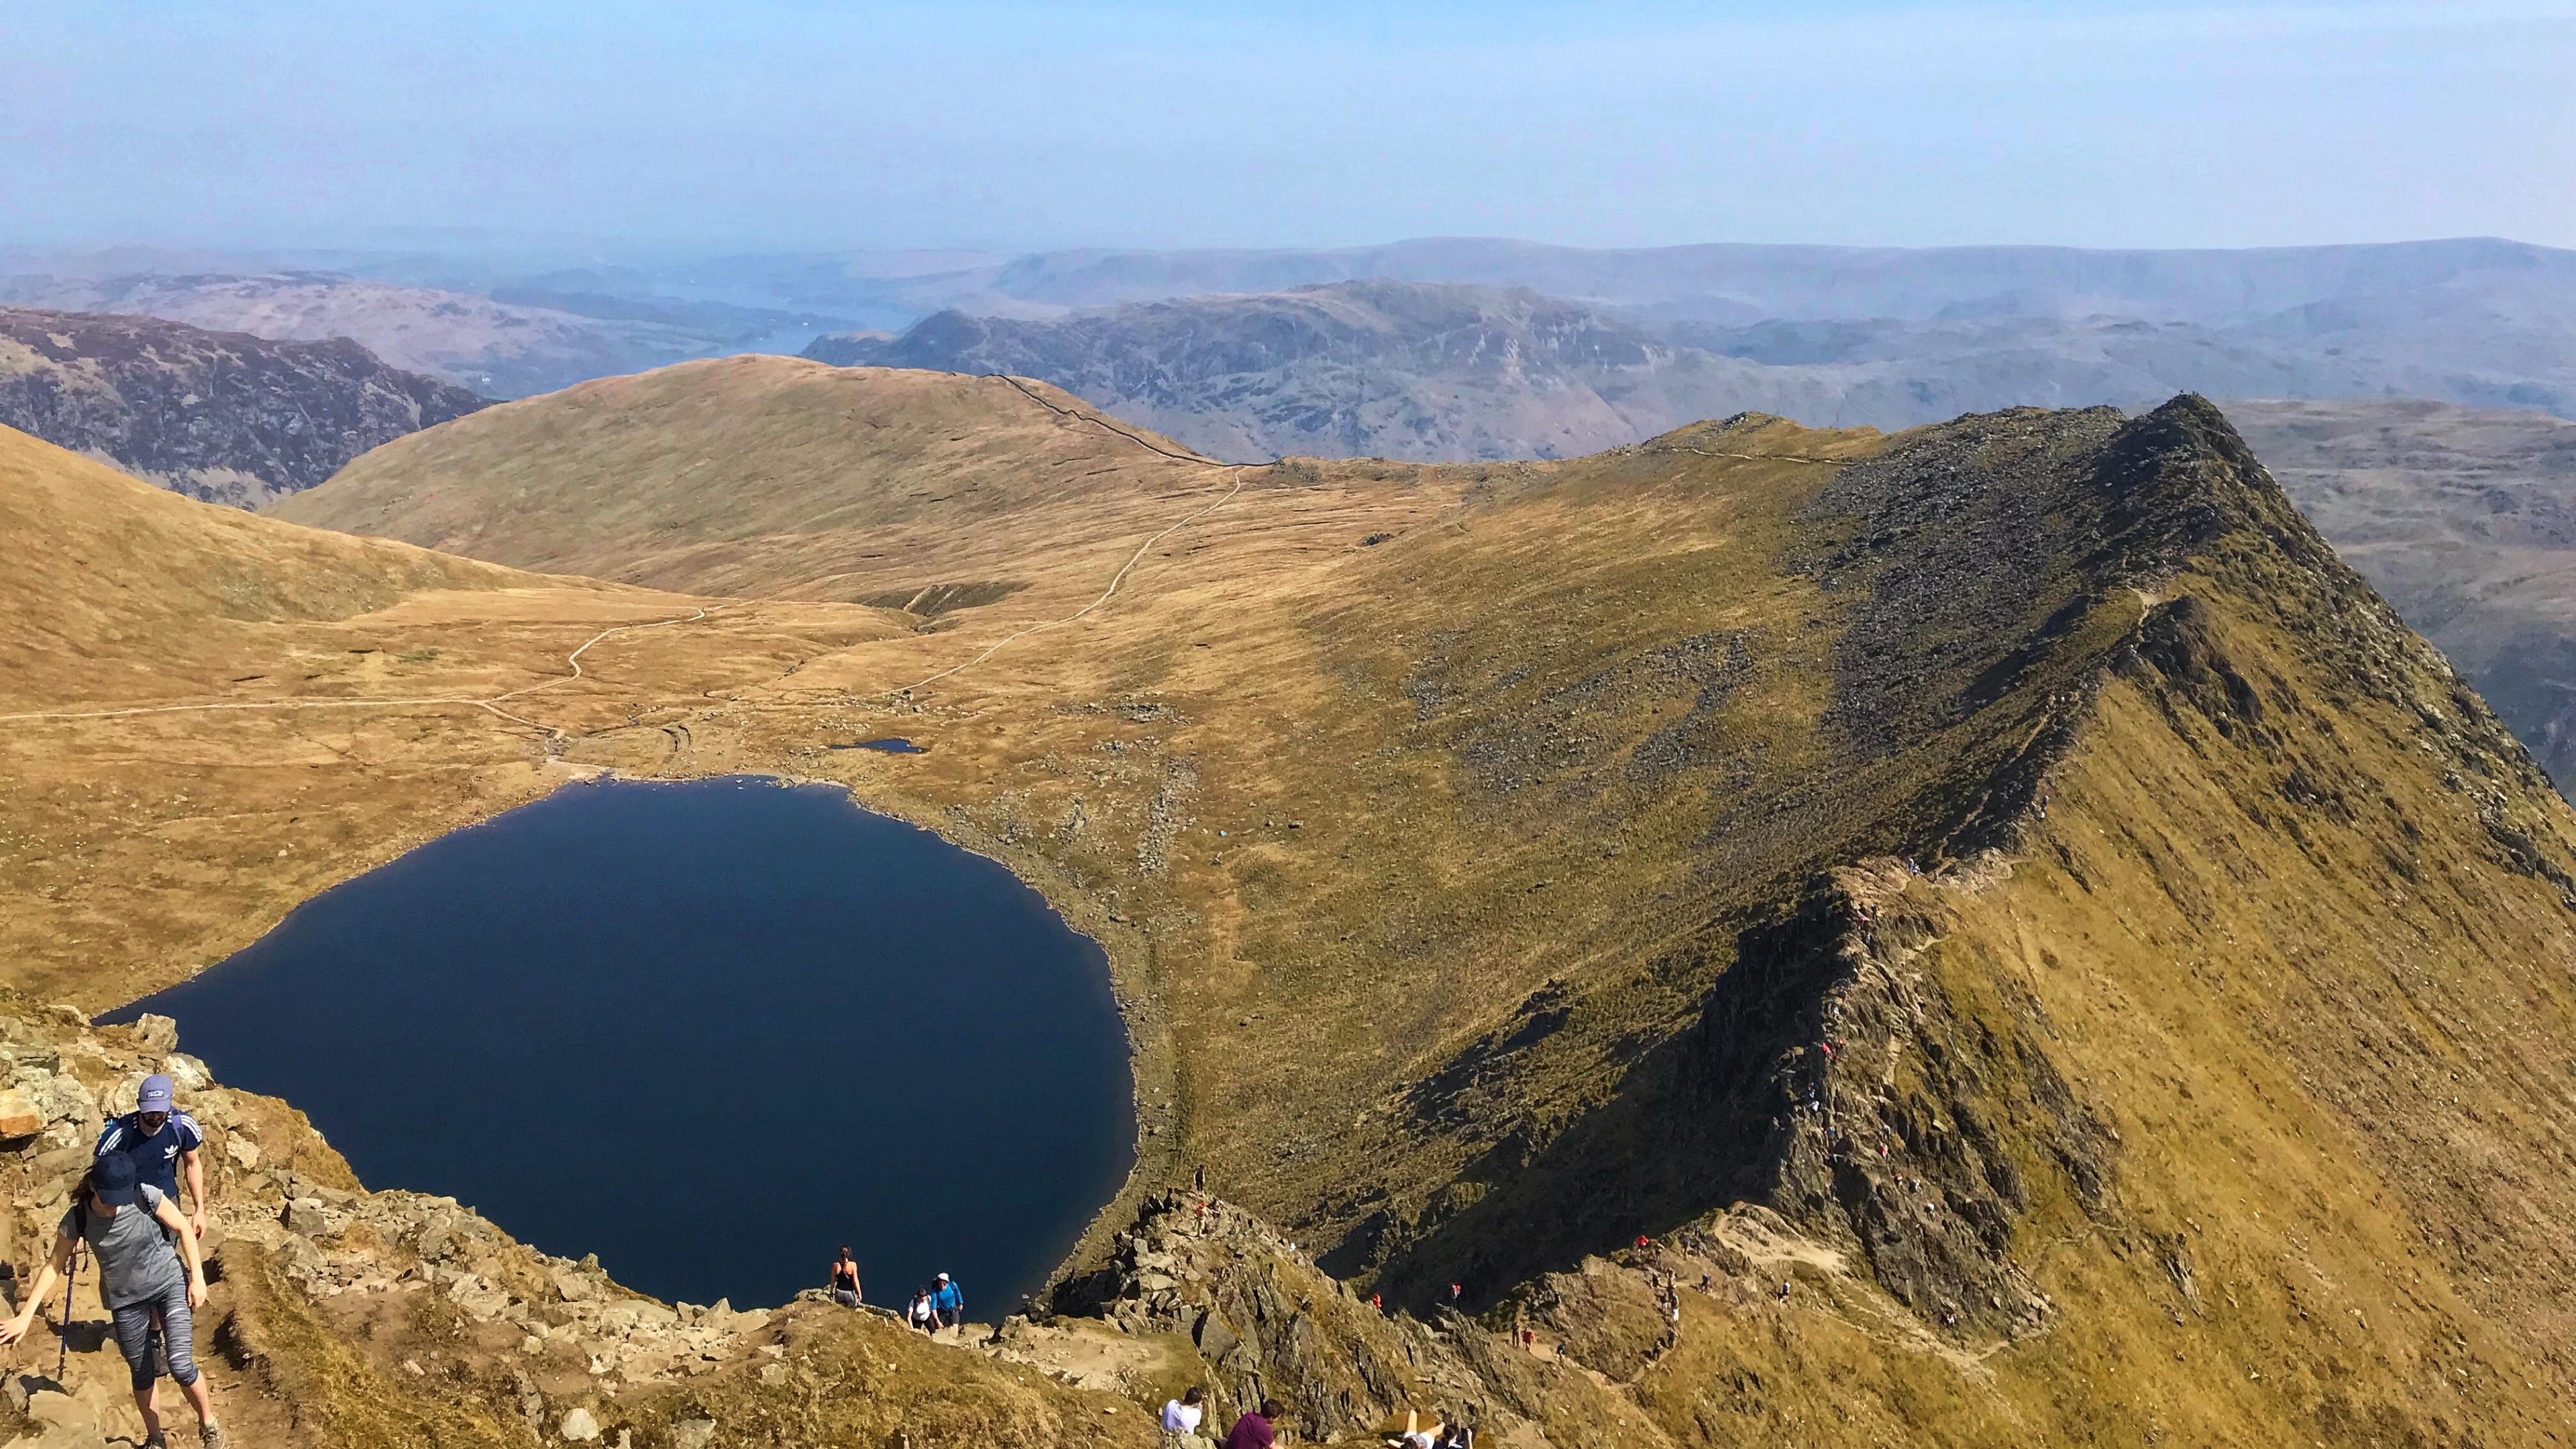 Great hikes to summit #Helvellyn, the third highest peak of England, at the Lake District #outdoor #lifeatexpedia